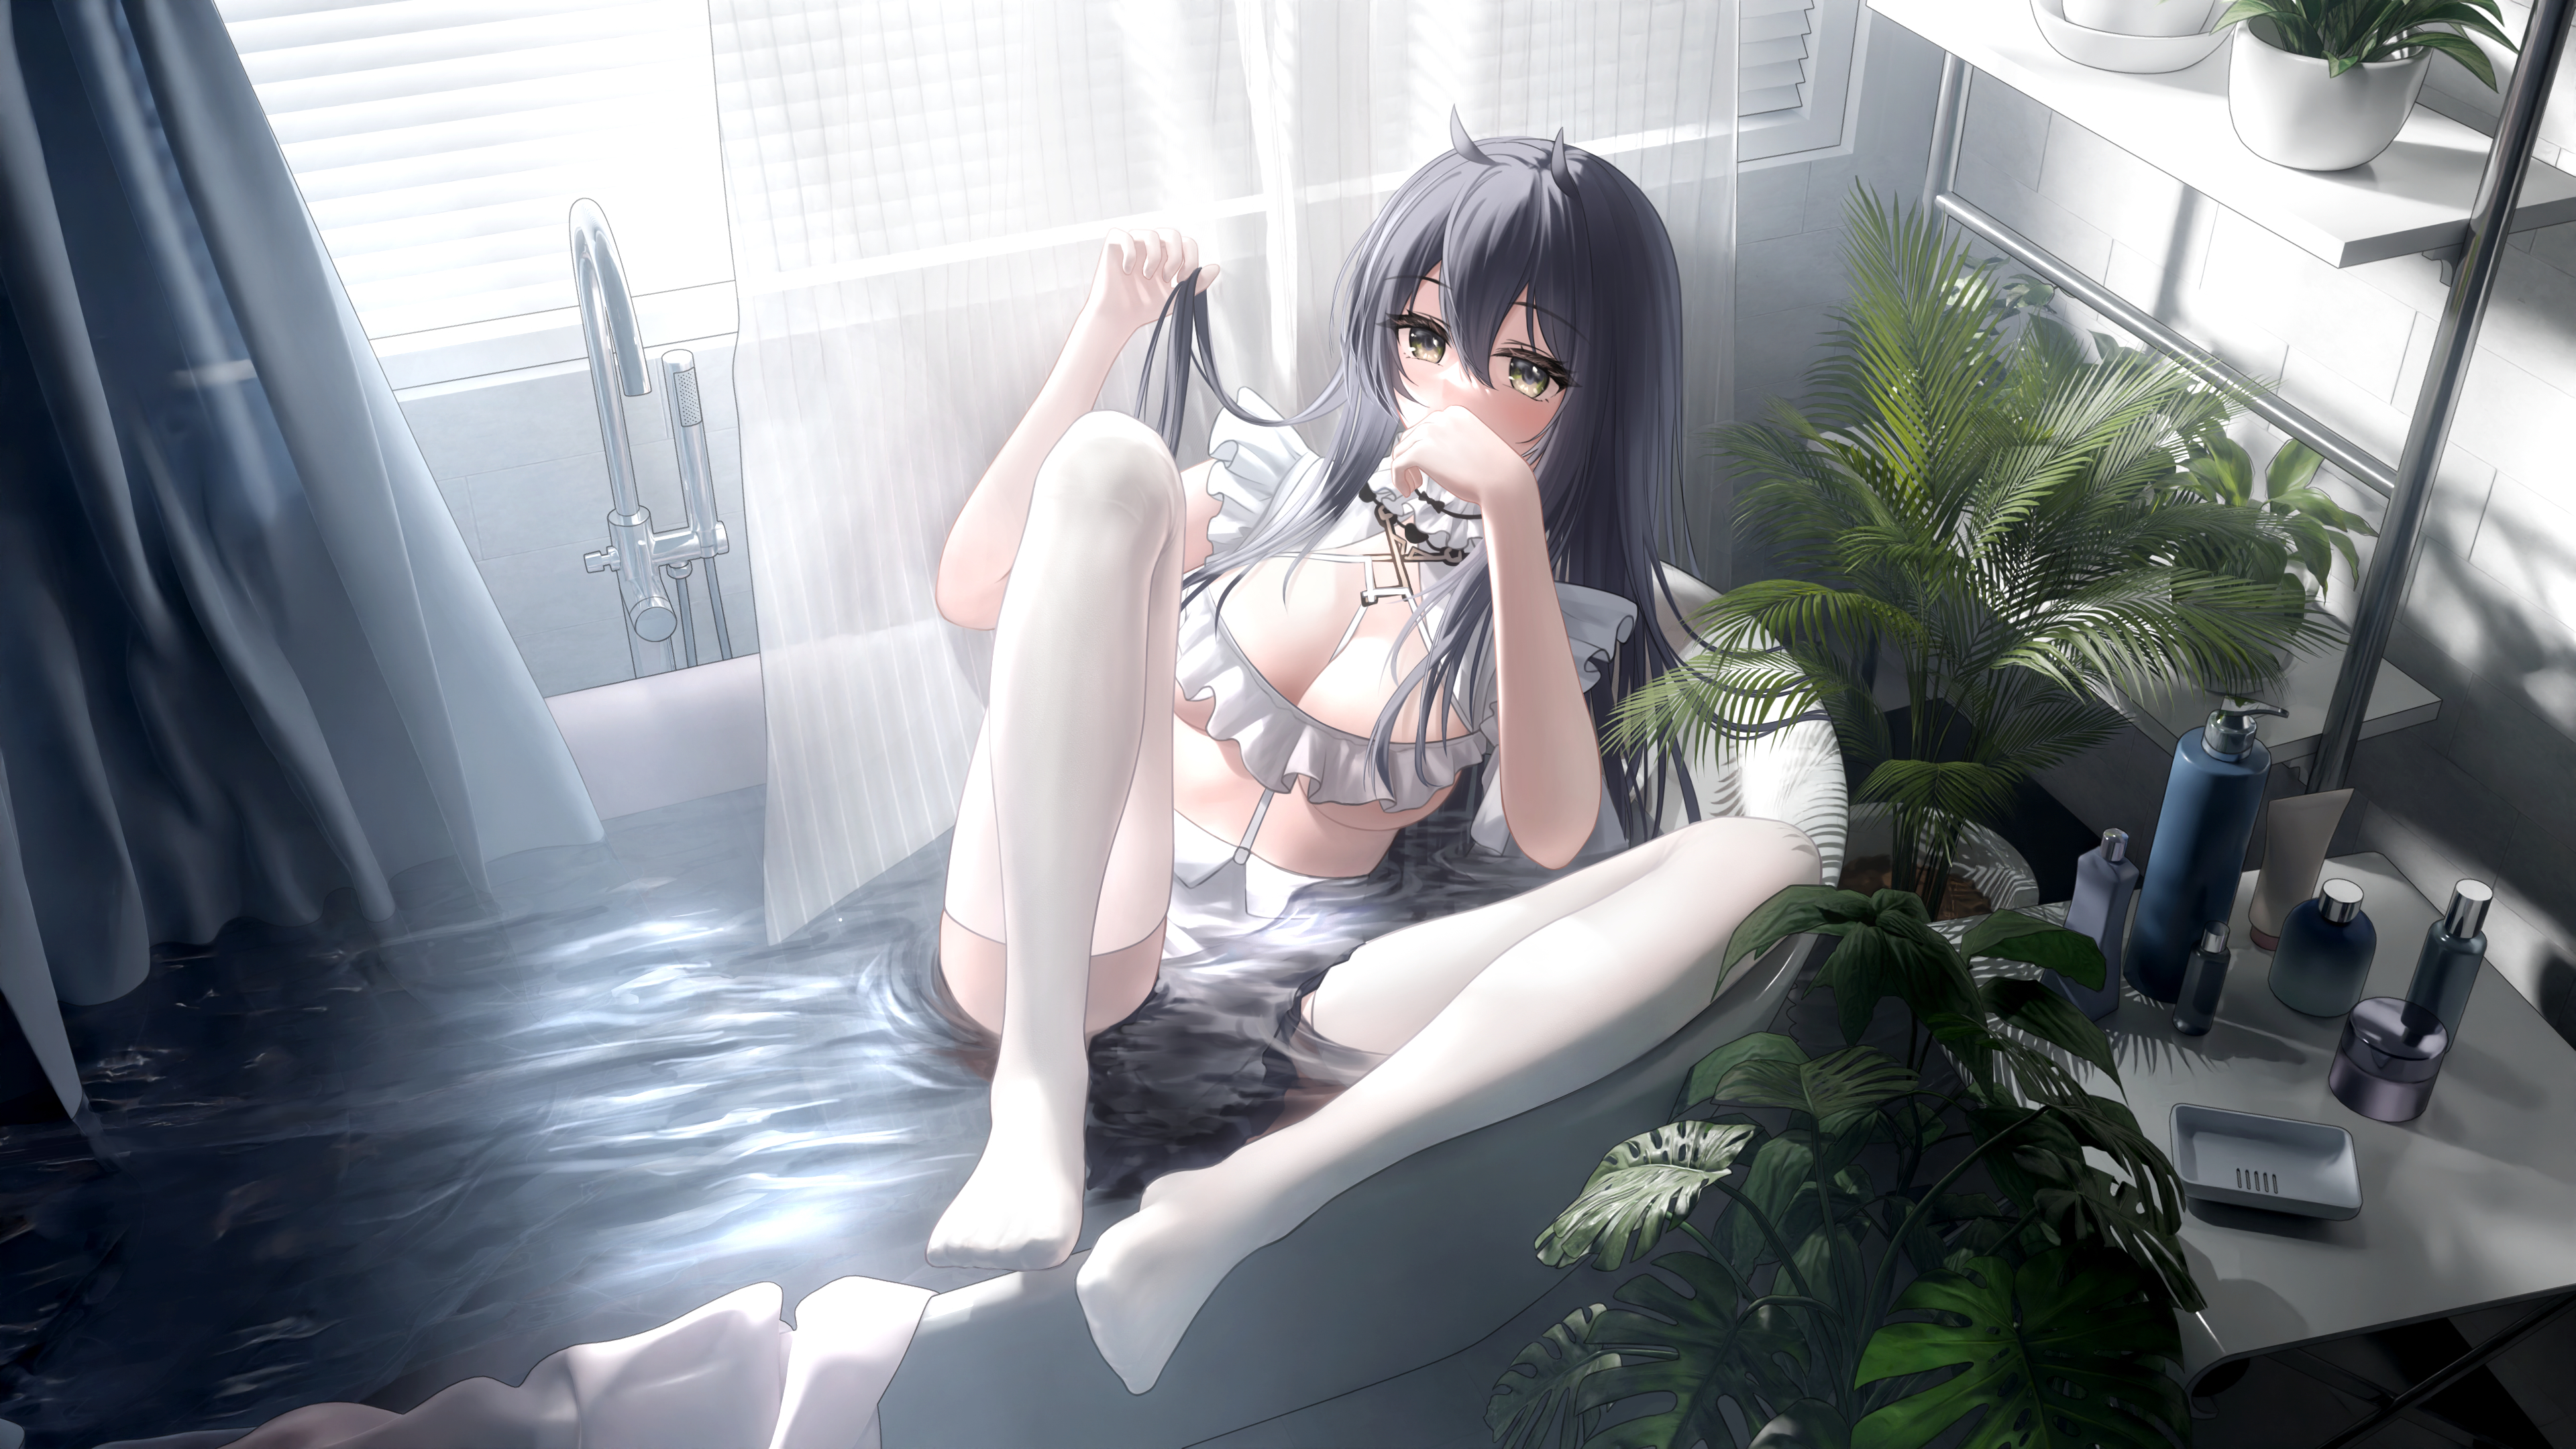 Anime 3840x2160 anime anime girls maid maid outfit bathtub cleavage big boobs in water water stockings